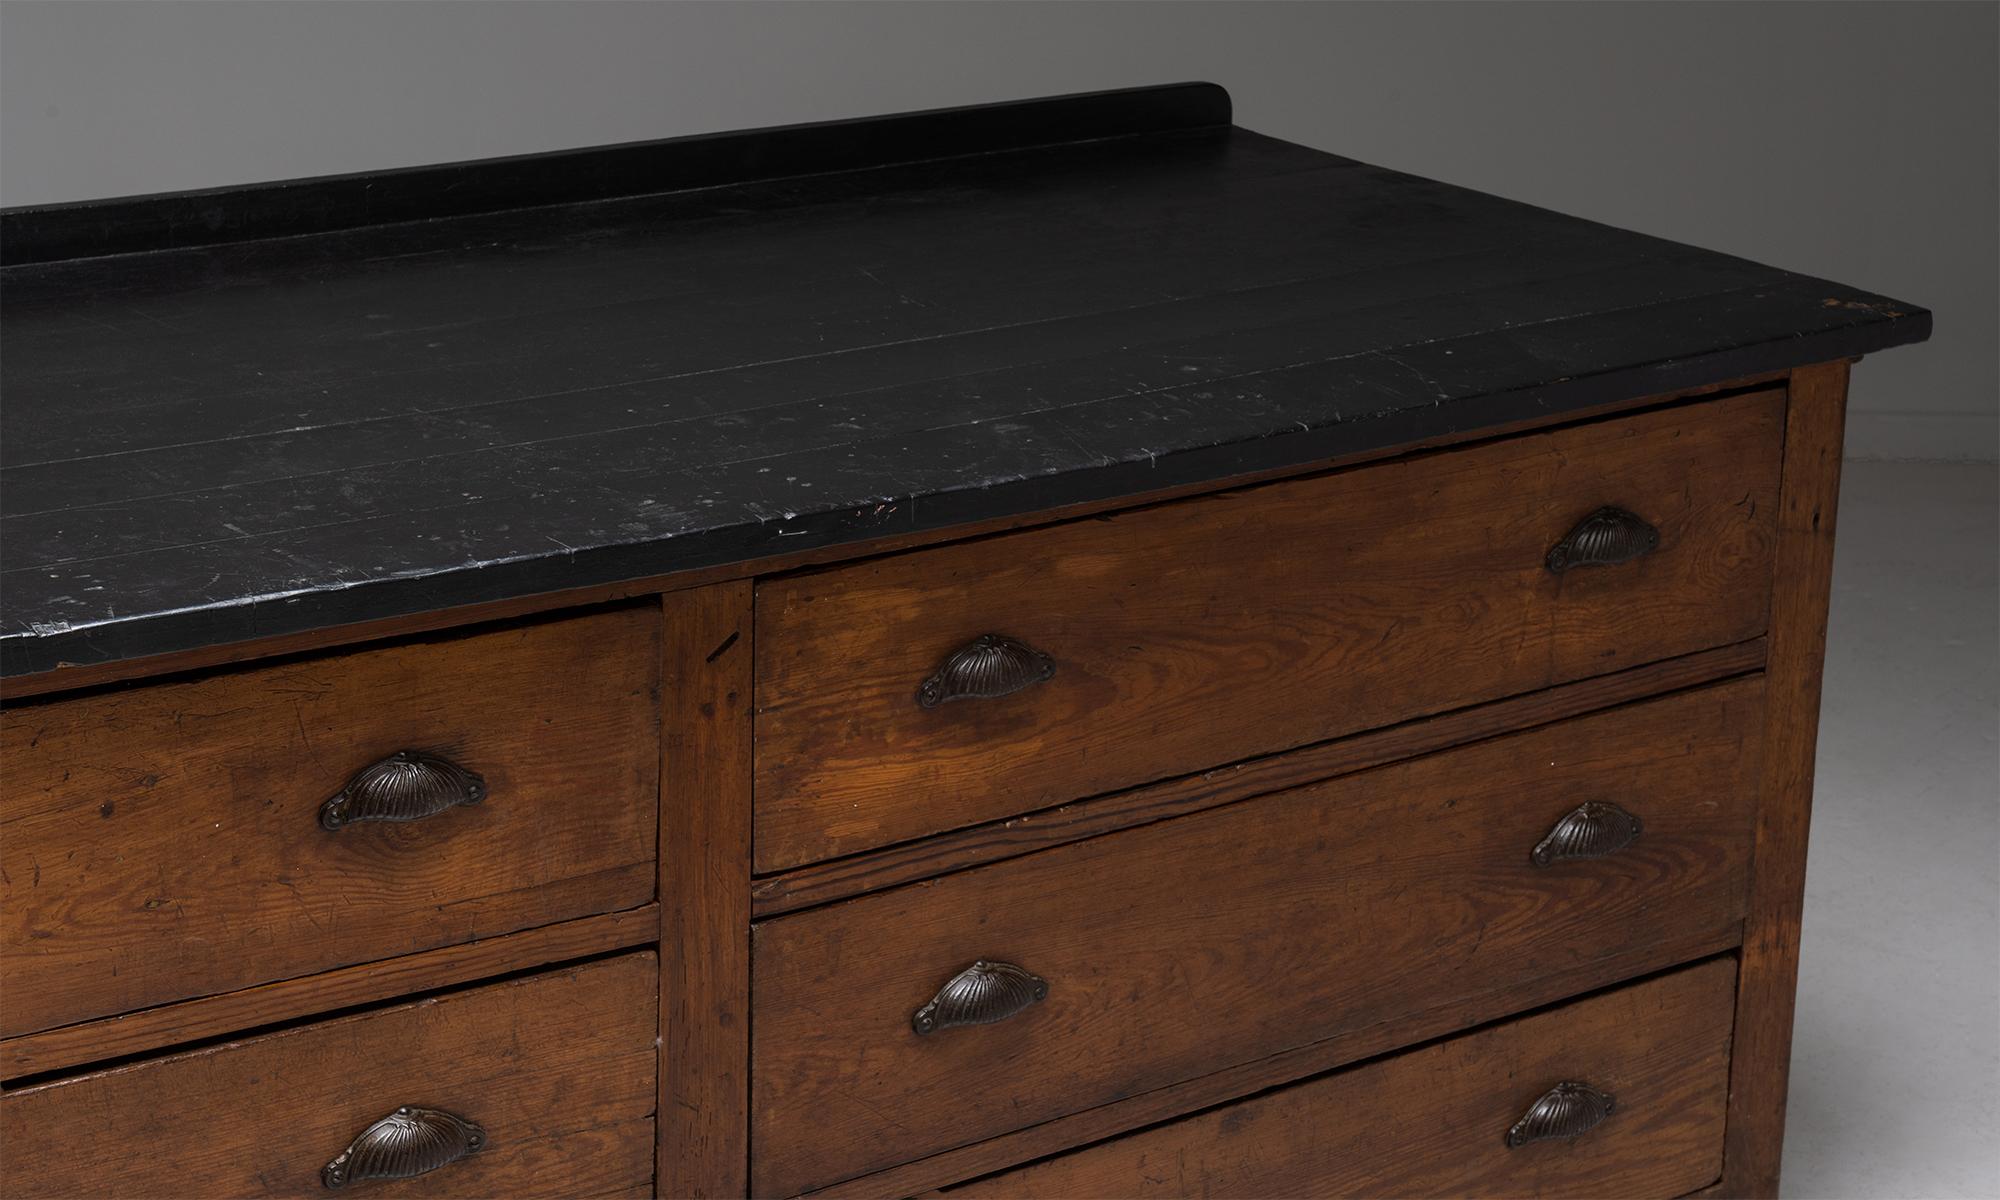 Chemists cabinet

England Circa 1900

Mahogany plank top in ebonised finish with pine drawers and body. Original brass pulls.

Measures: 85.5”w x 33.5”d x 35.5”h.